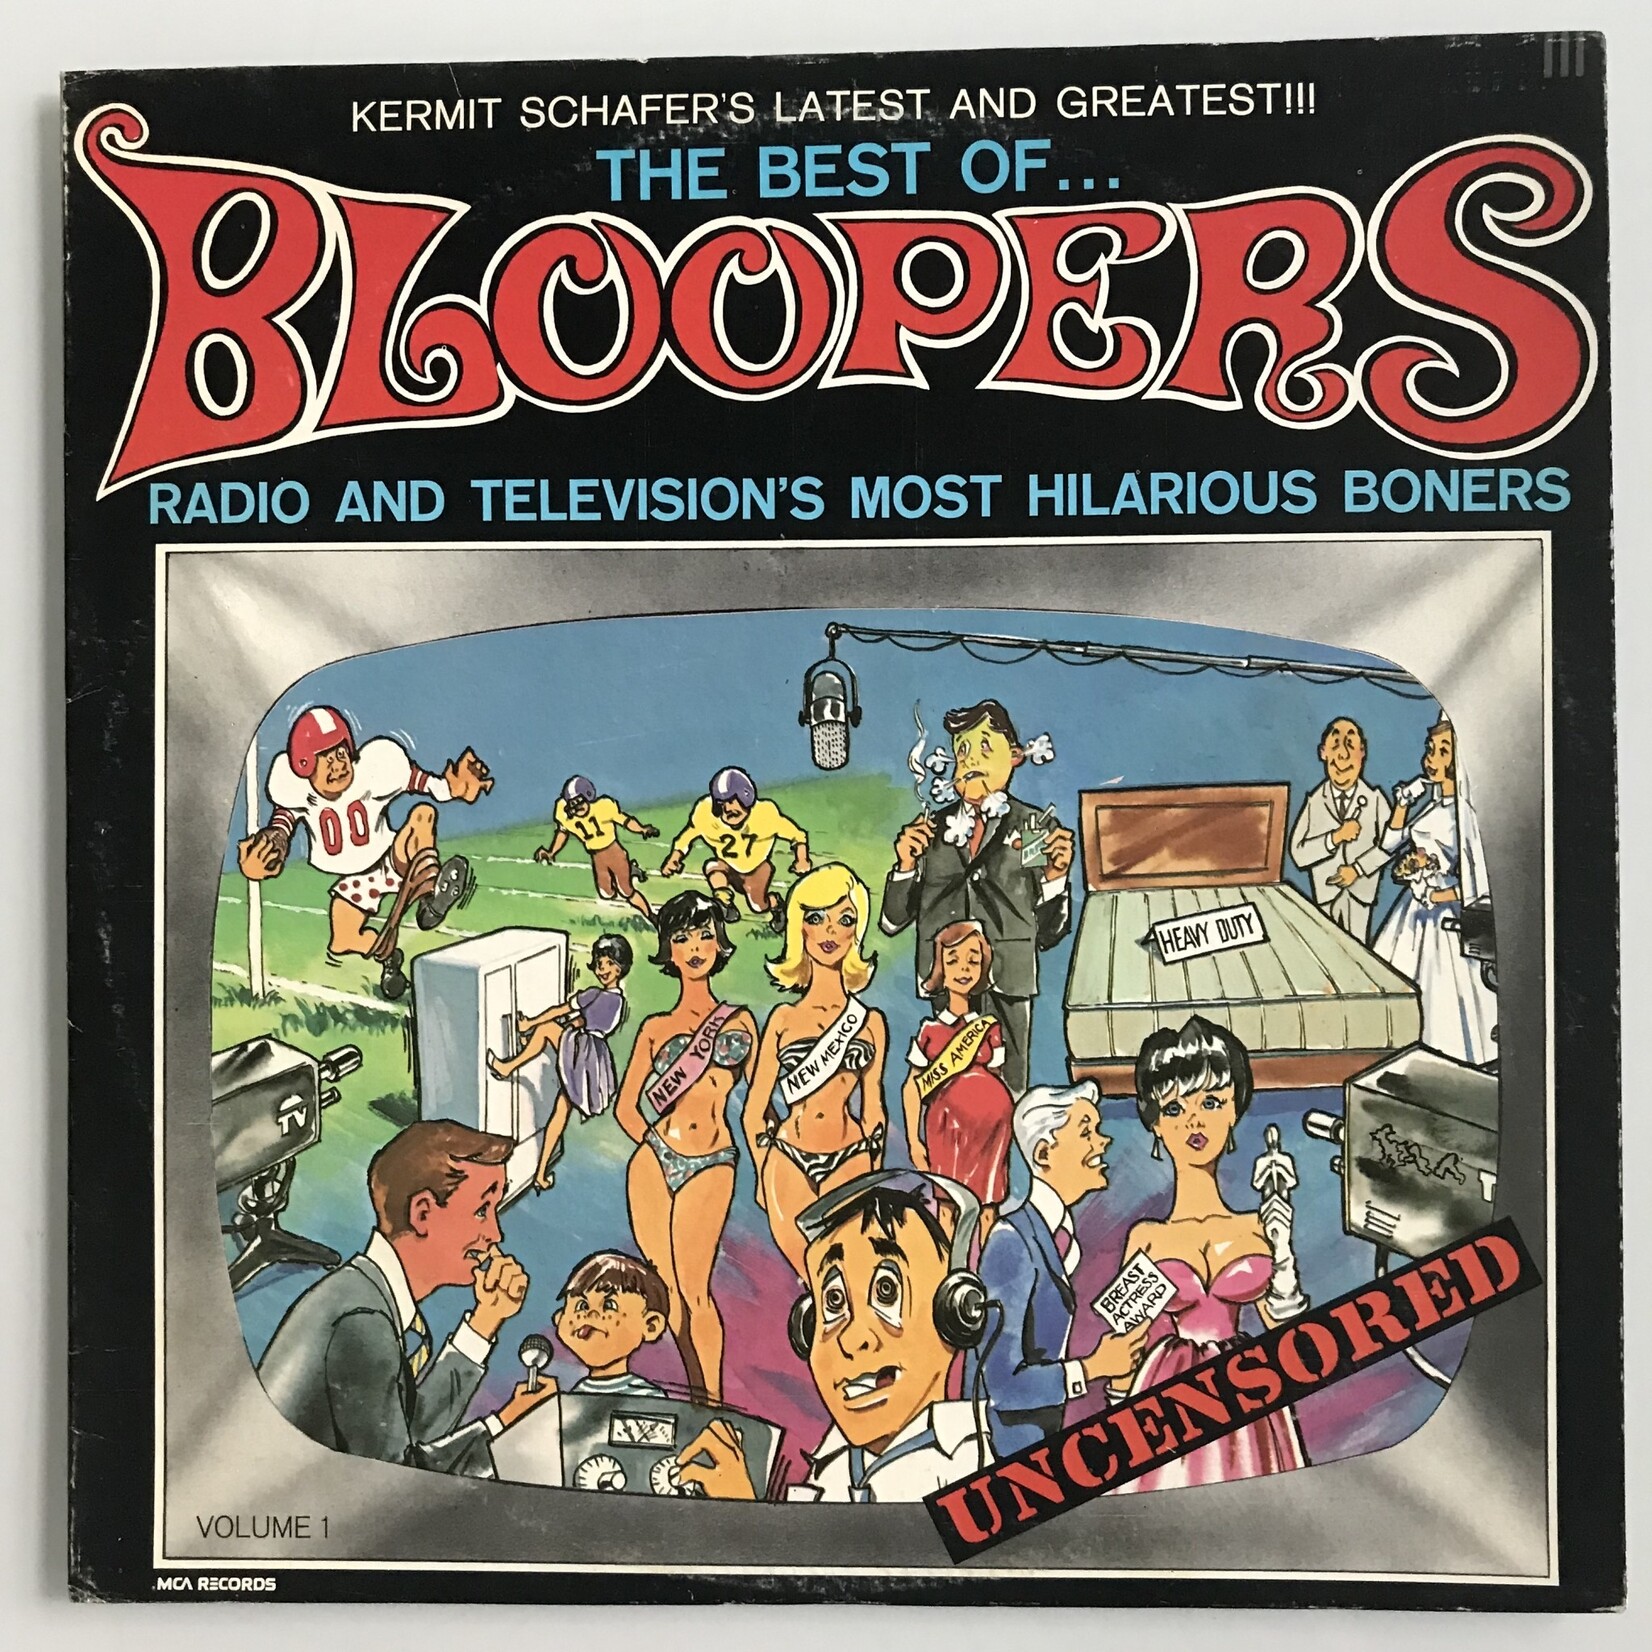 Kermit Schafer - The Best Of Bloopers: Radio And Television’s Most Hilarious Boners Volume 1 - Vinyl LP (USED)